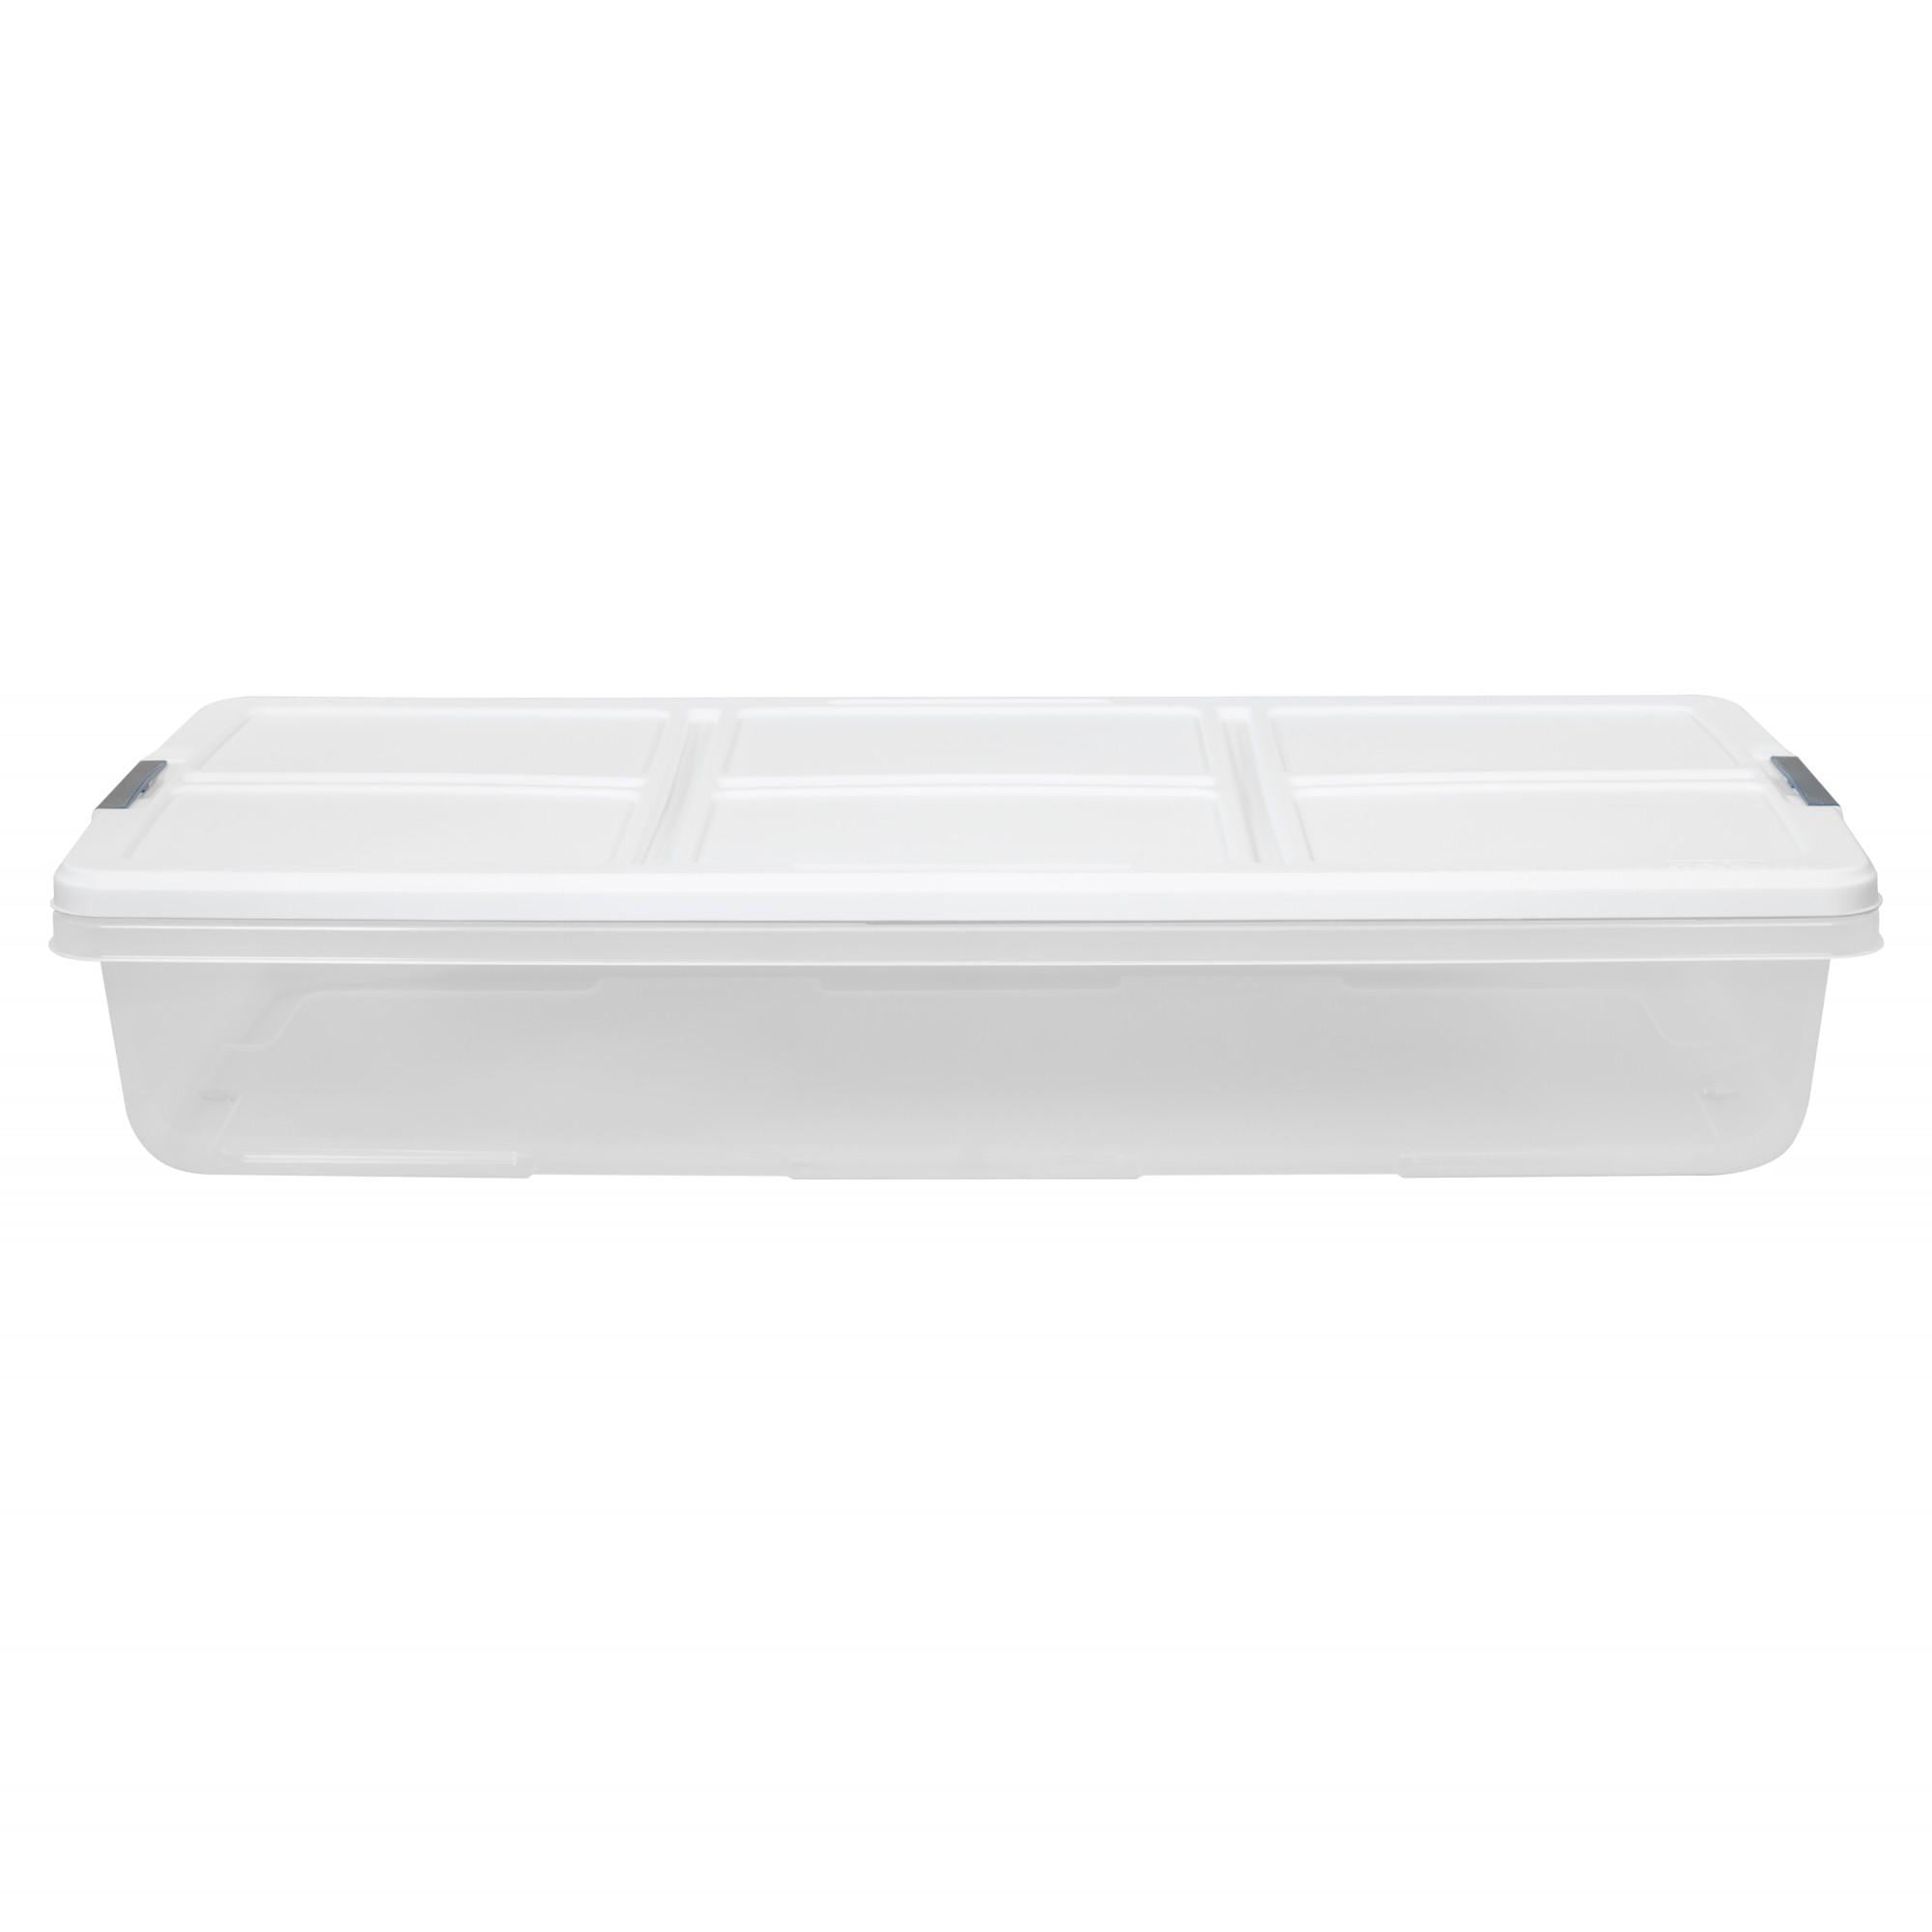 OEMVALATY 52 QT. Large Storage Bins with Lids,Stackable Foldable Plastic  Storage Boxes with Buckles and Handles,Large Capacity Containers for